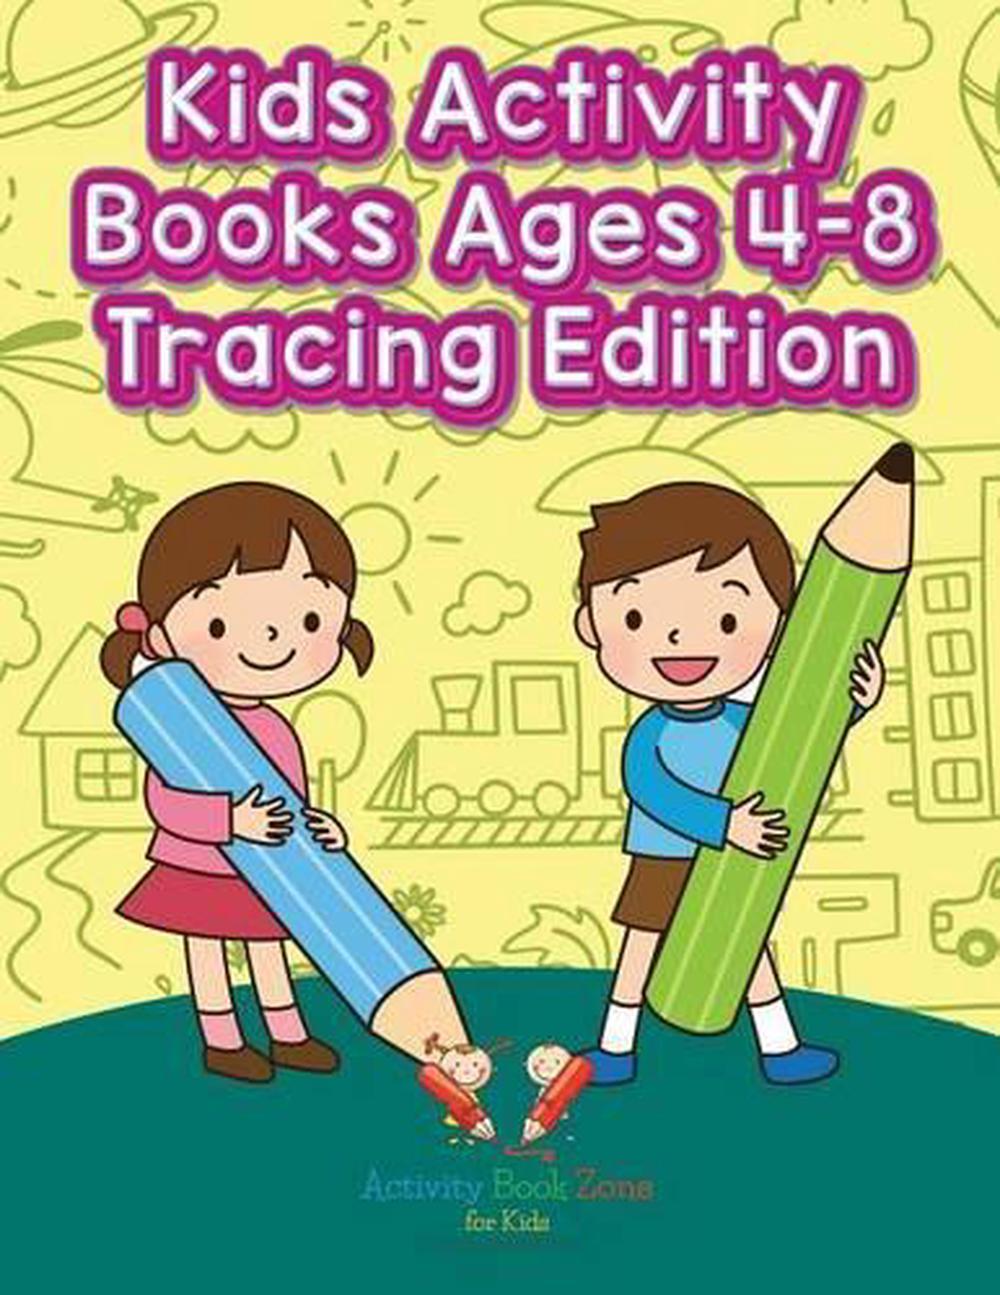 Kids Activity Books Ages 4 8 Tracing Edition By Activity Book Zone For 